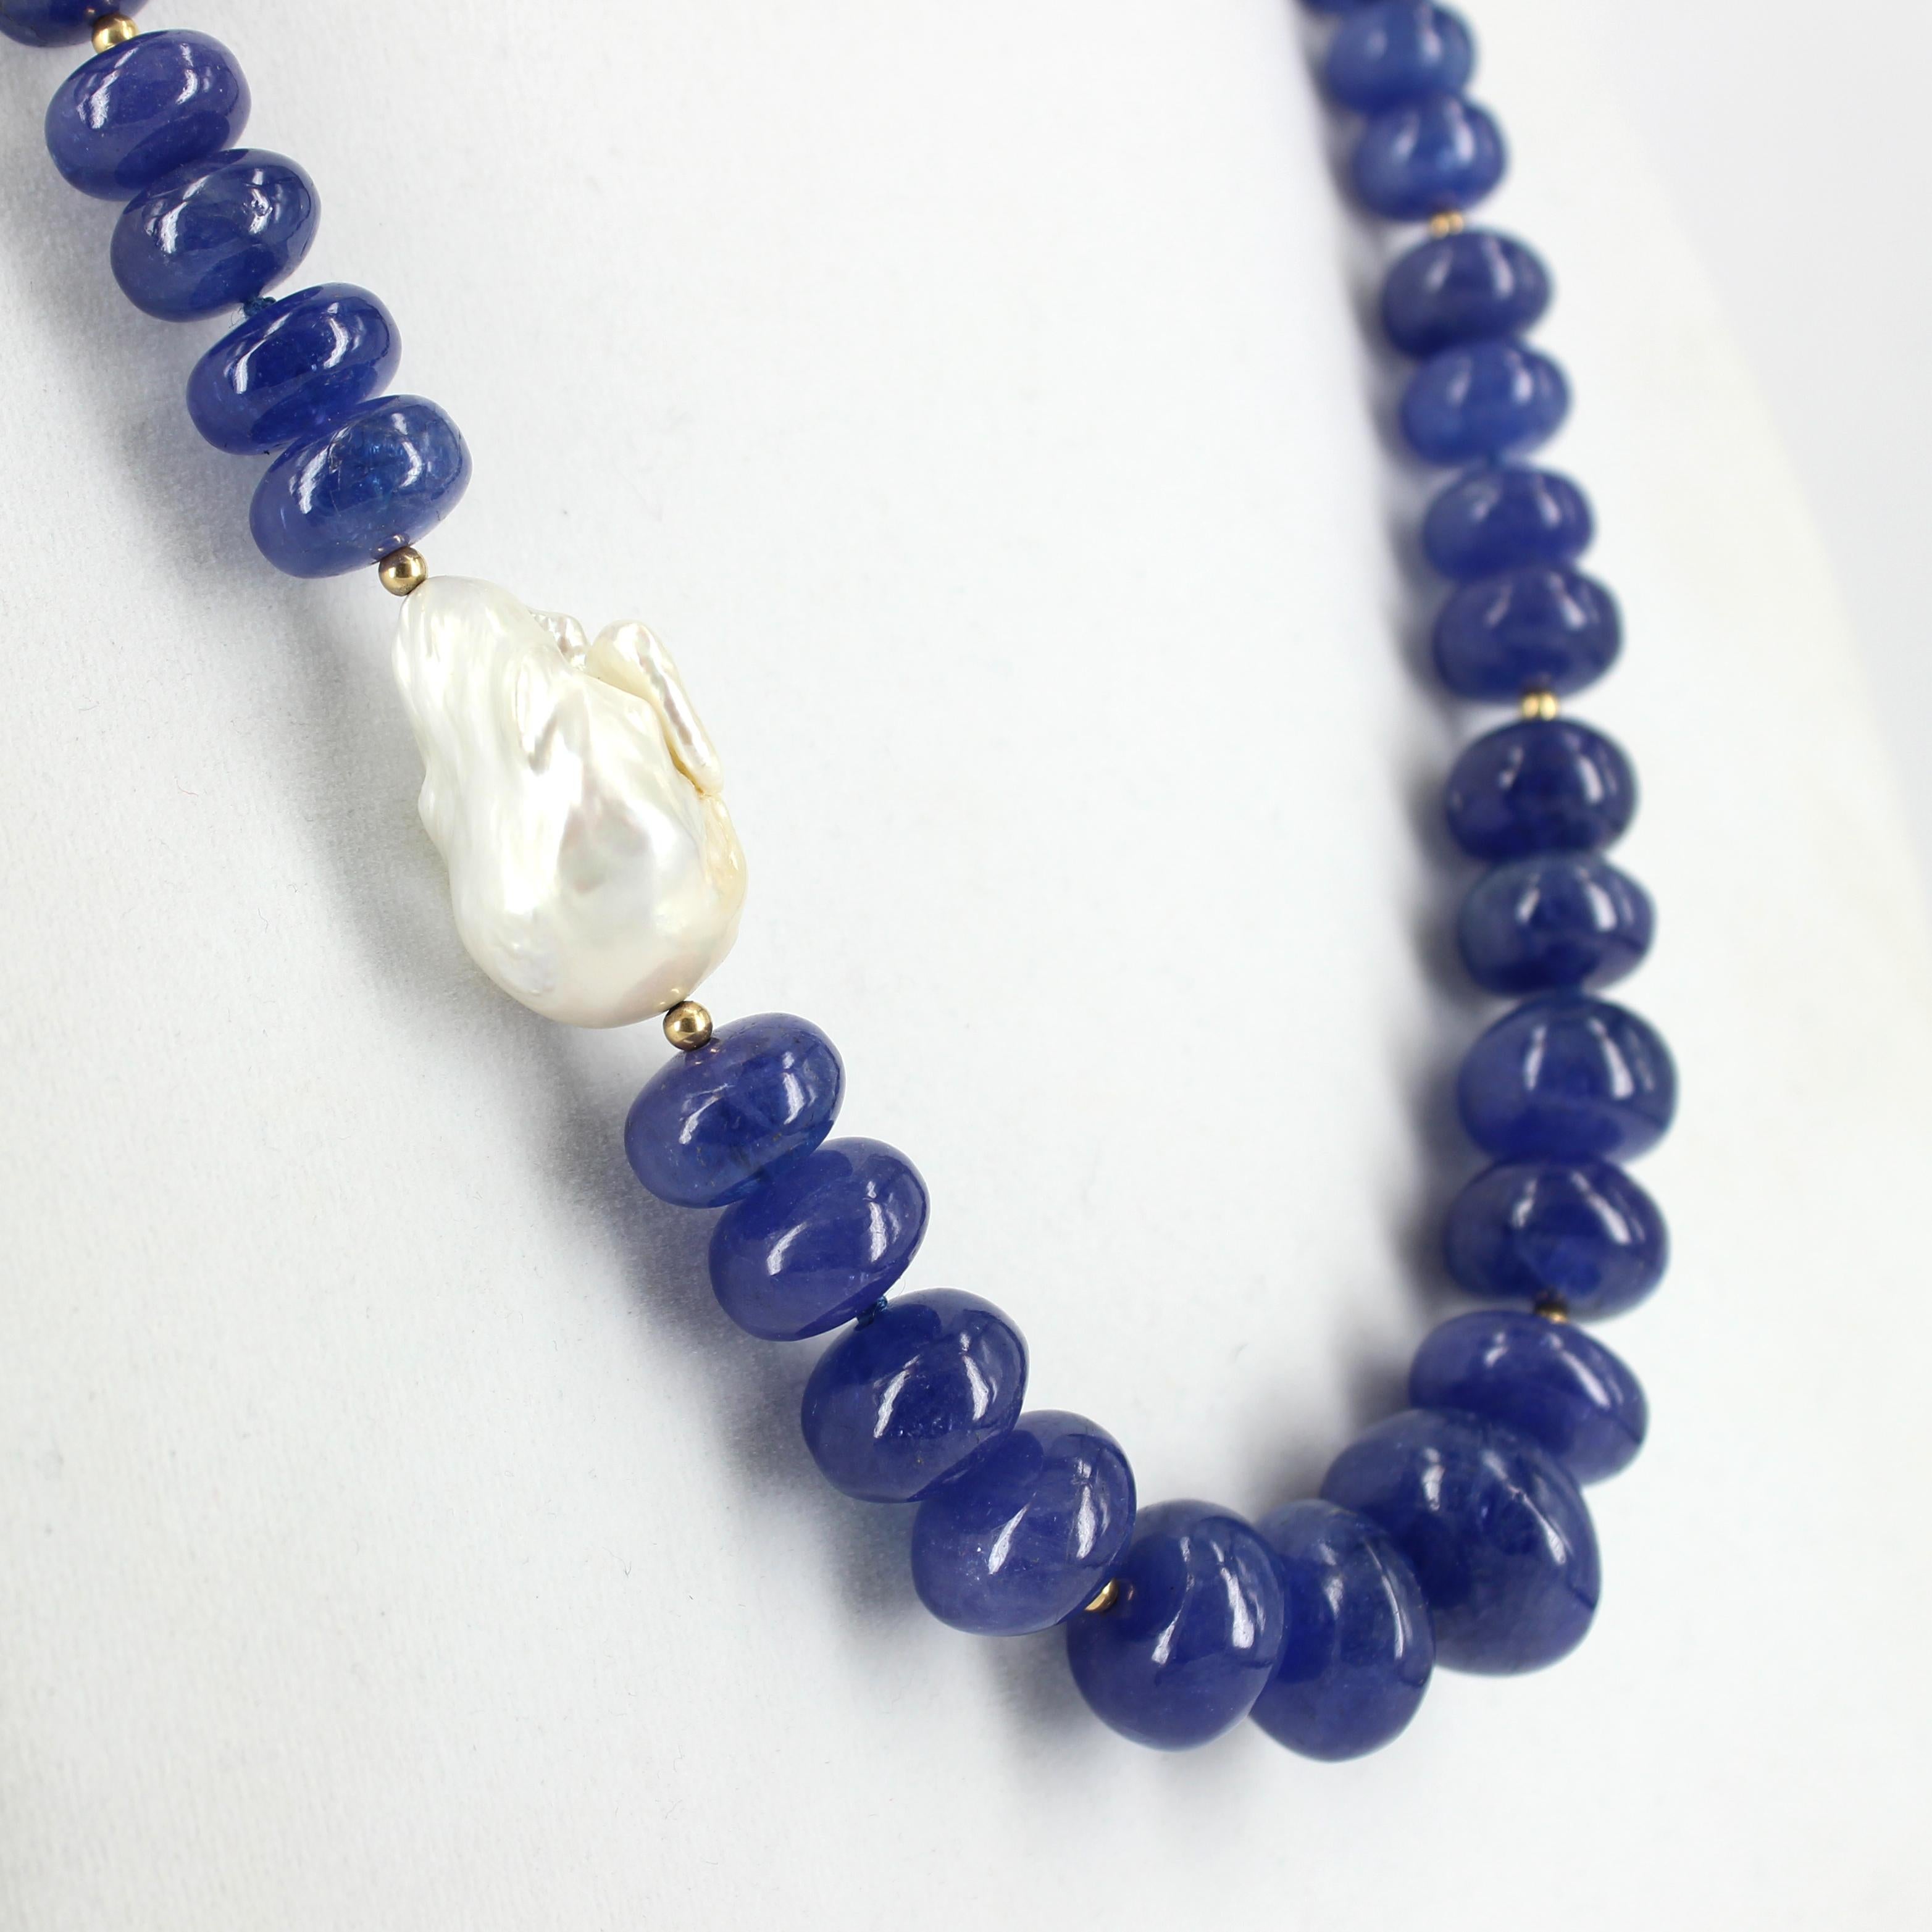 Tanzanite one of the most desired gems in the world. Tanzanite has a beautiful striking shade of blue, complemented with Fresh Water Baroque Pearl off-centred, it would make a standout addition to your collection.

Description Tanzanite Graduated